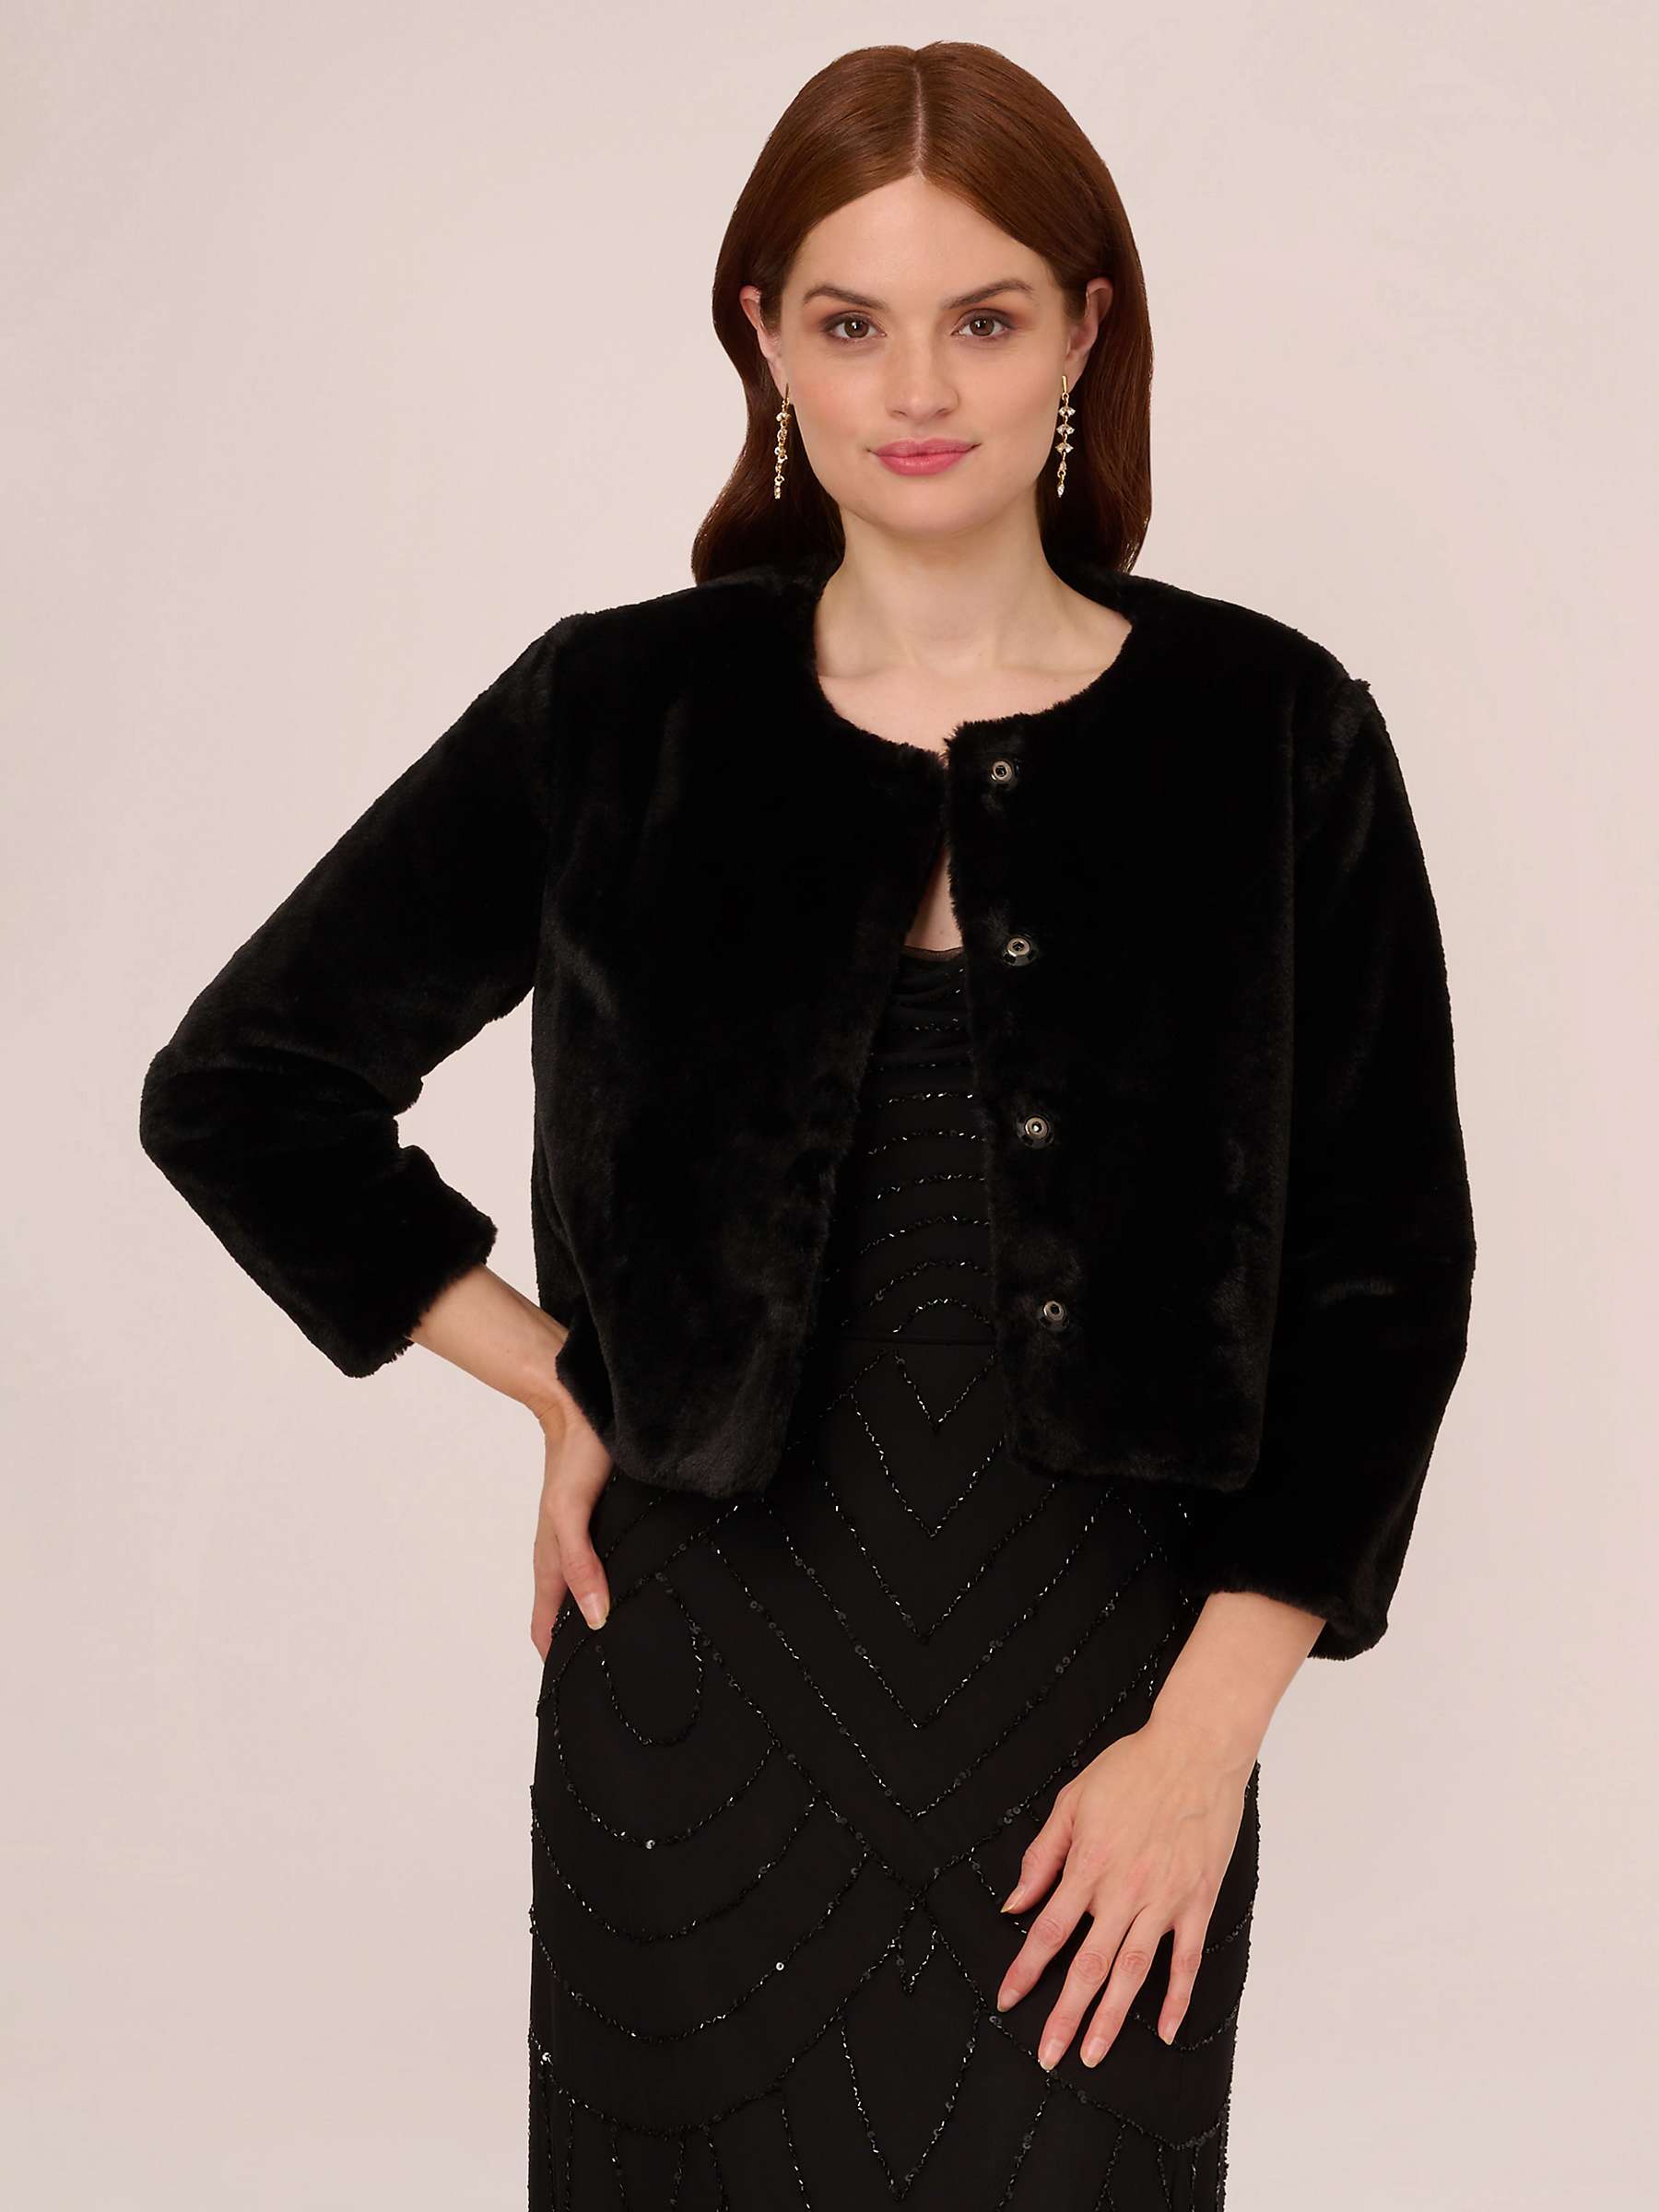 Buy Adrianna Papell 3/4 Sleeve Faux Fur Jacket, Black Online at johnlewis.com